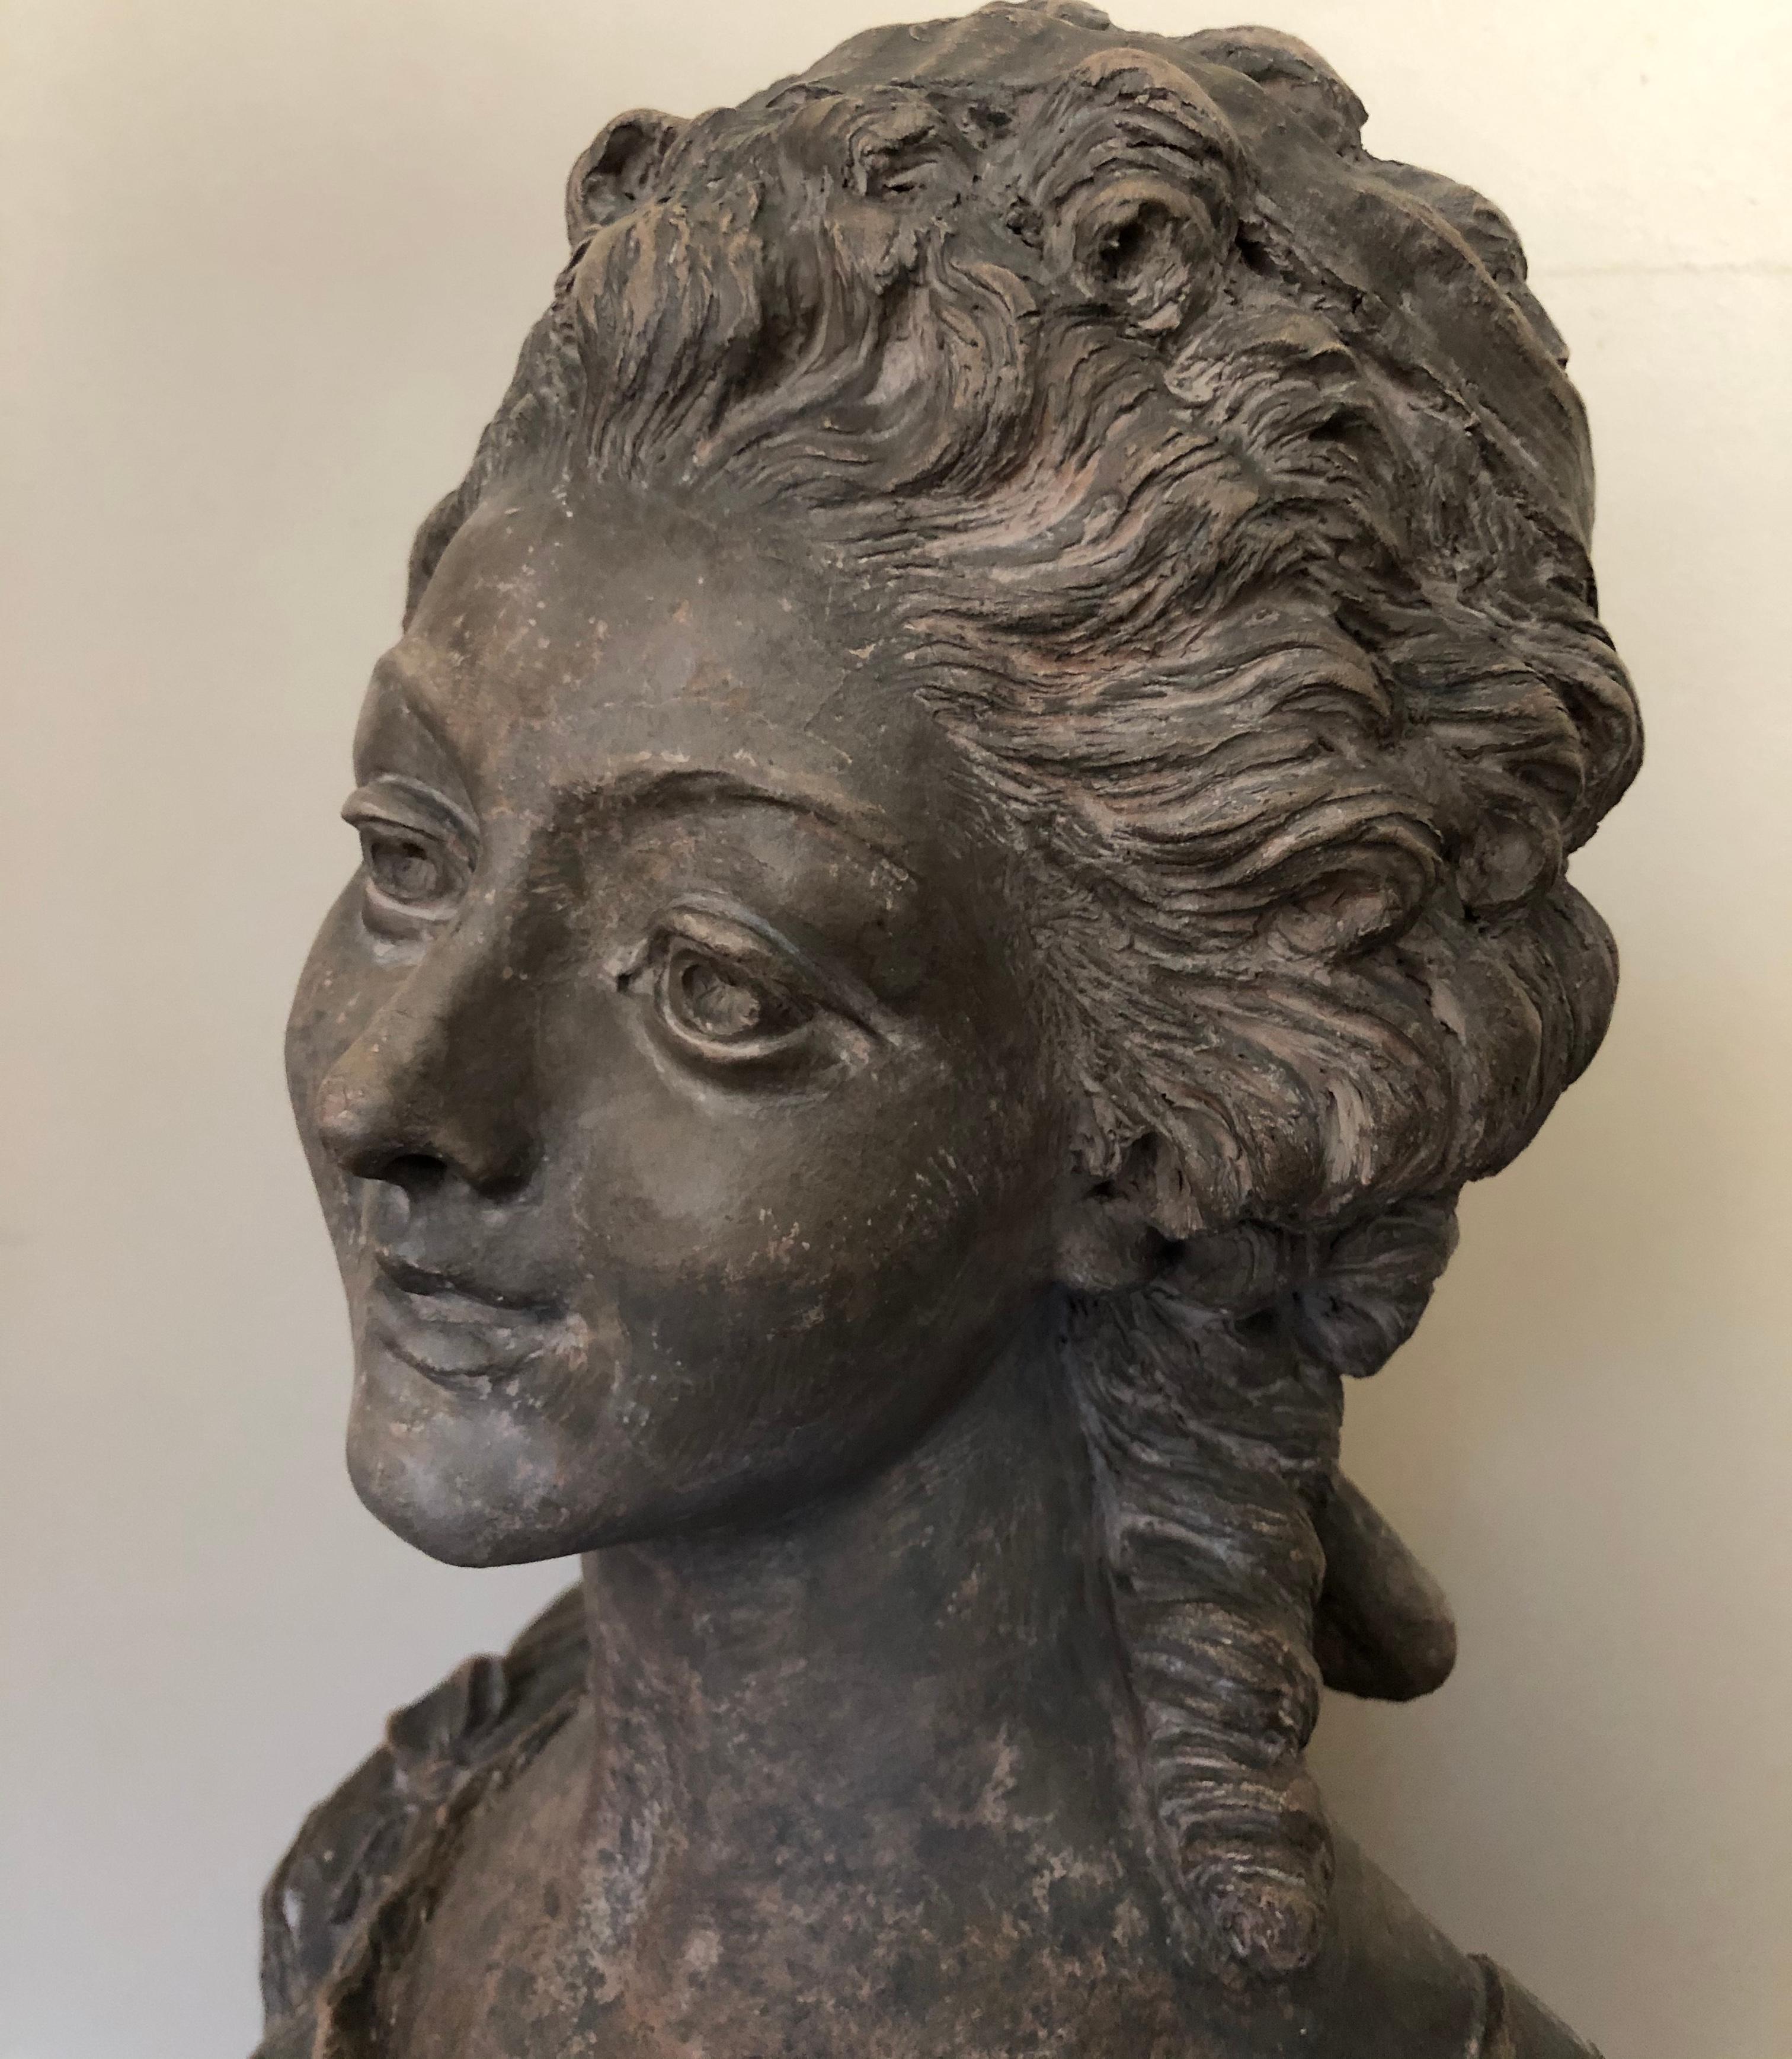 The sculpture is in excellent condition, possibly French circa 1900. There is a small chip on the pedestal base, but it is not noticeable and does not distract from the overall appeal.